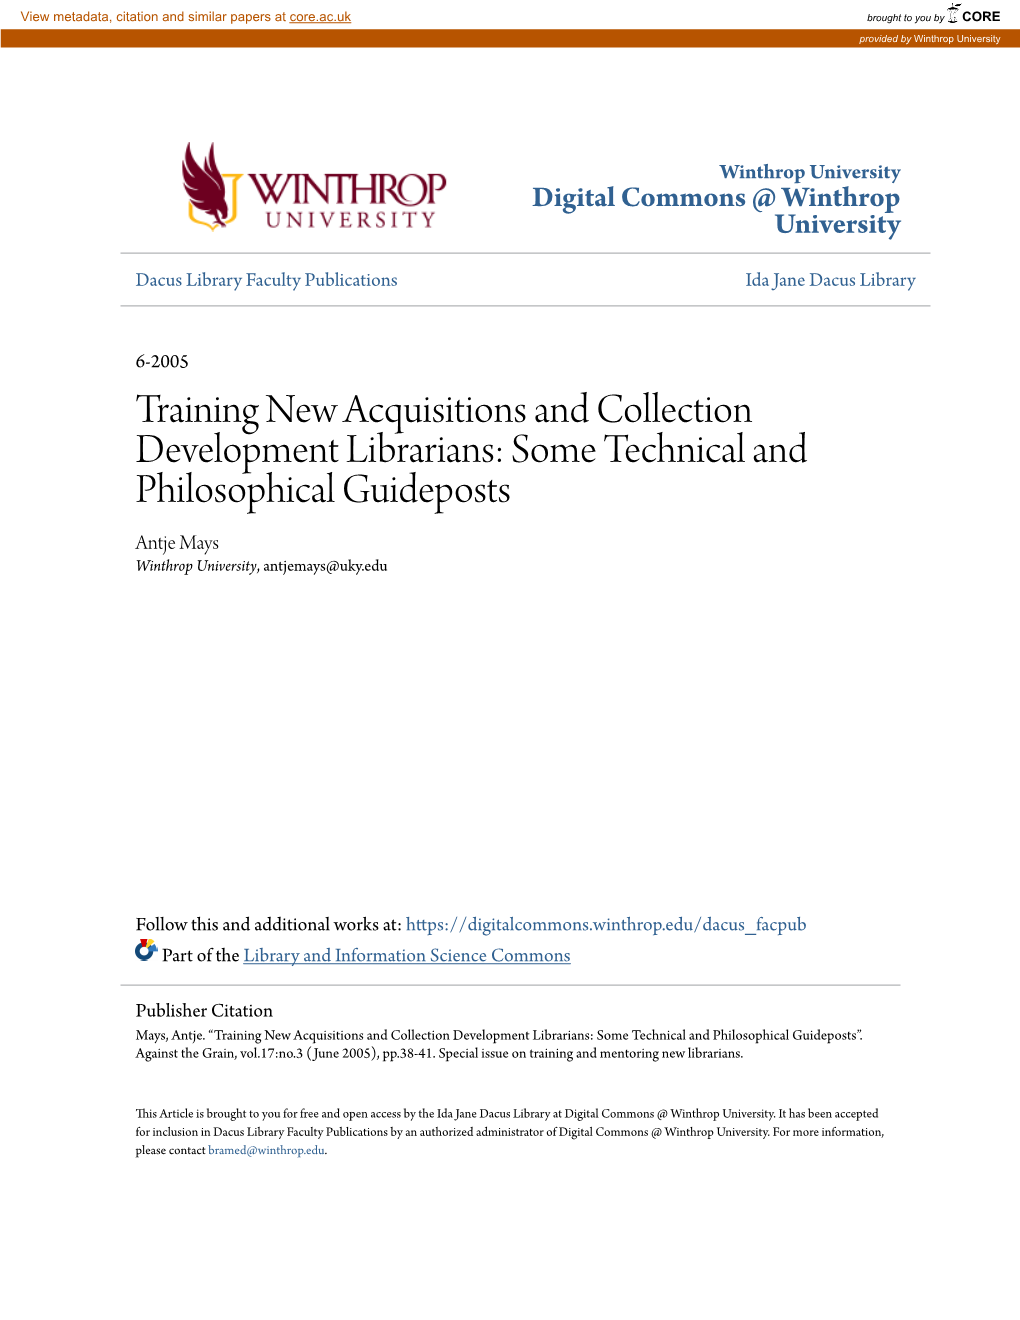 Training New Acquisitions and Collection Development Librarians: Some Technical and Philosophical Guideposts Antje Mays Winthrop University, Antjemays@Uky.Edu